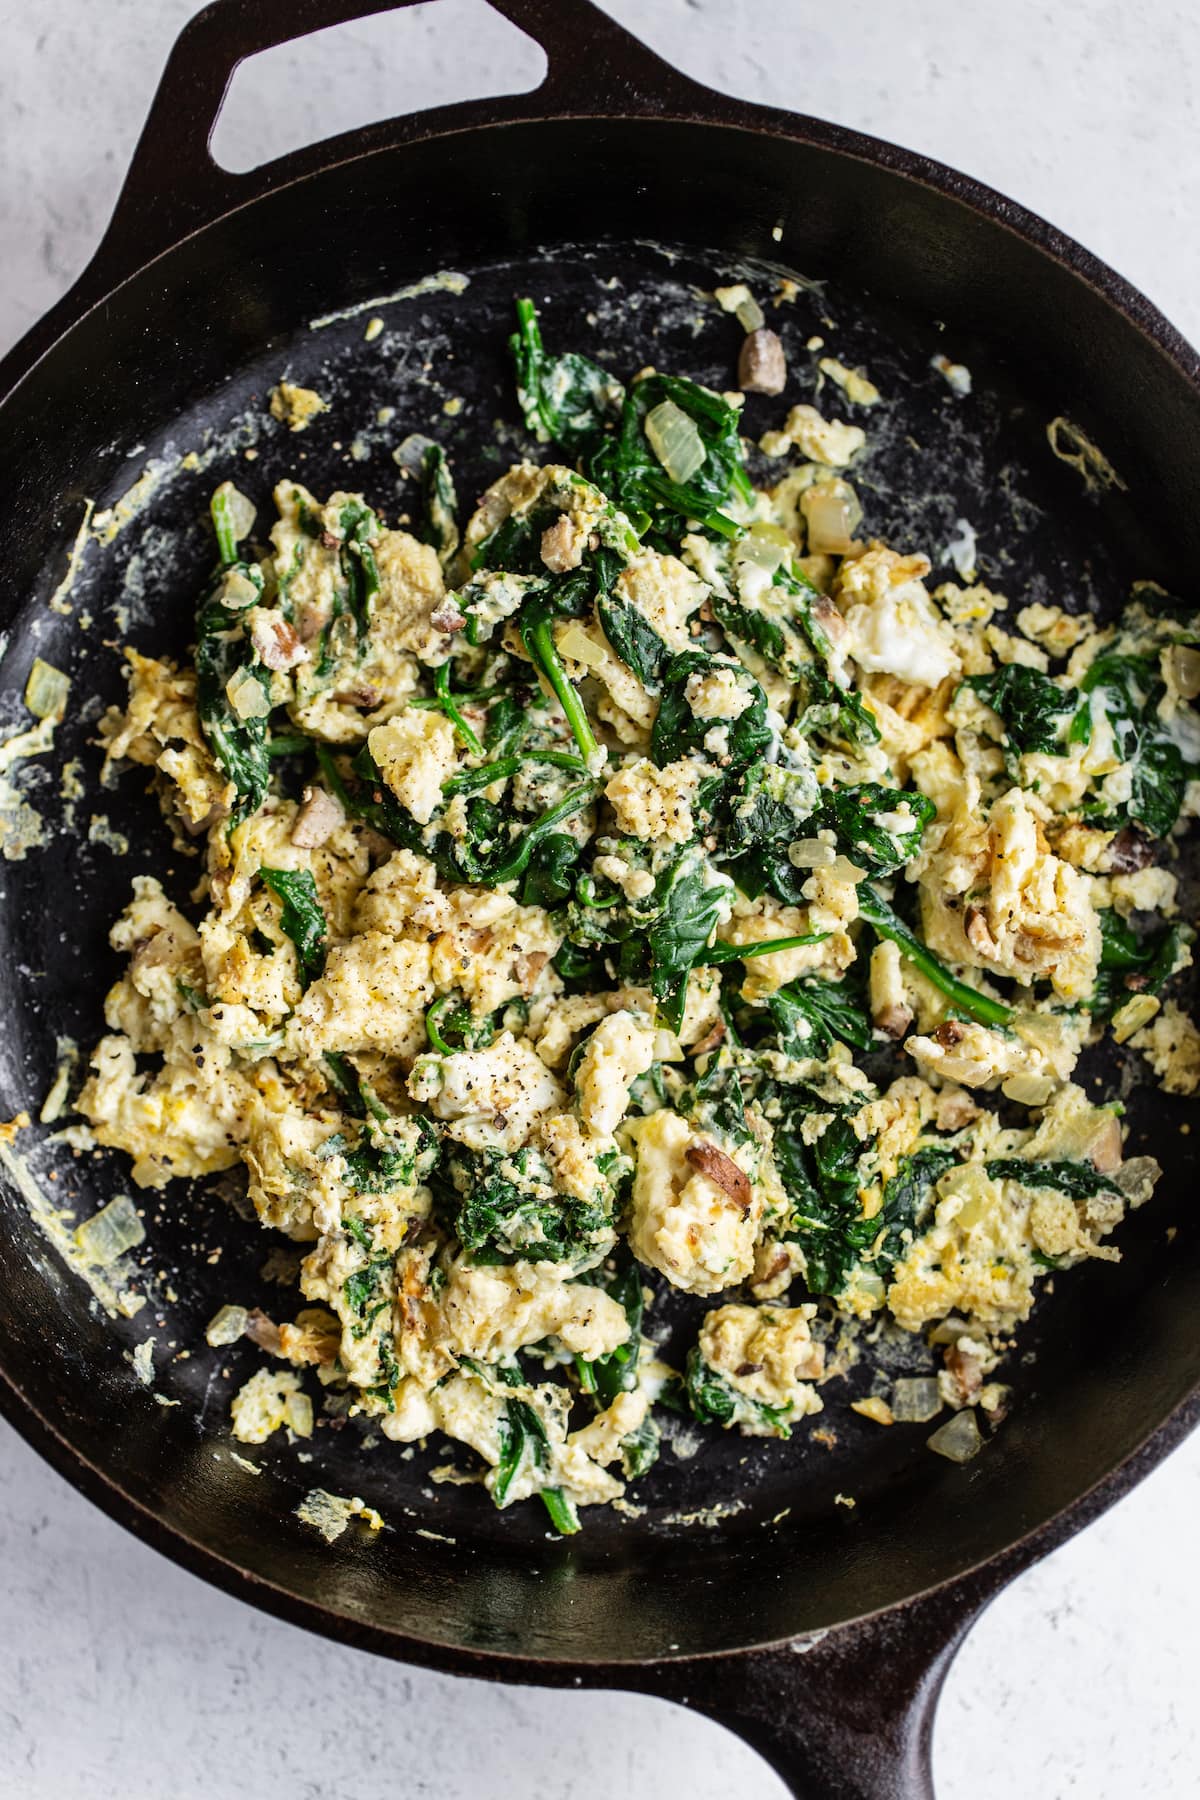 Scrambled eggs with spinach in a cast iron skillet.